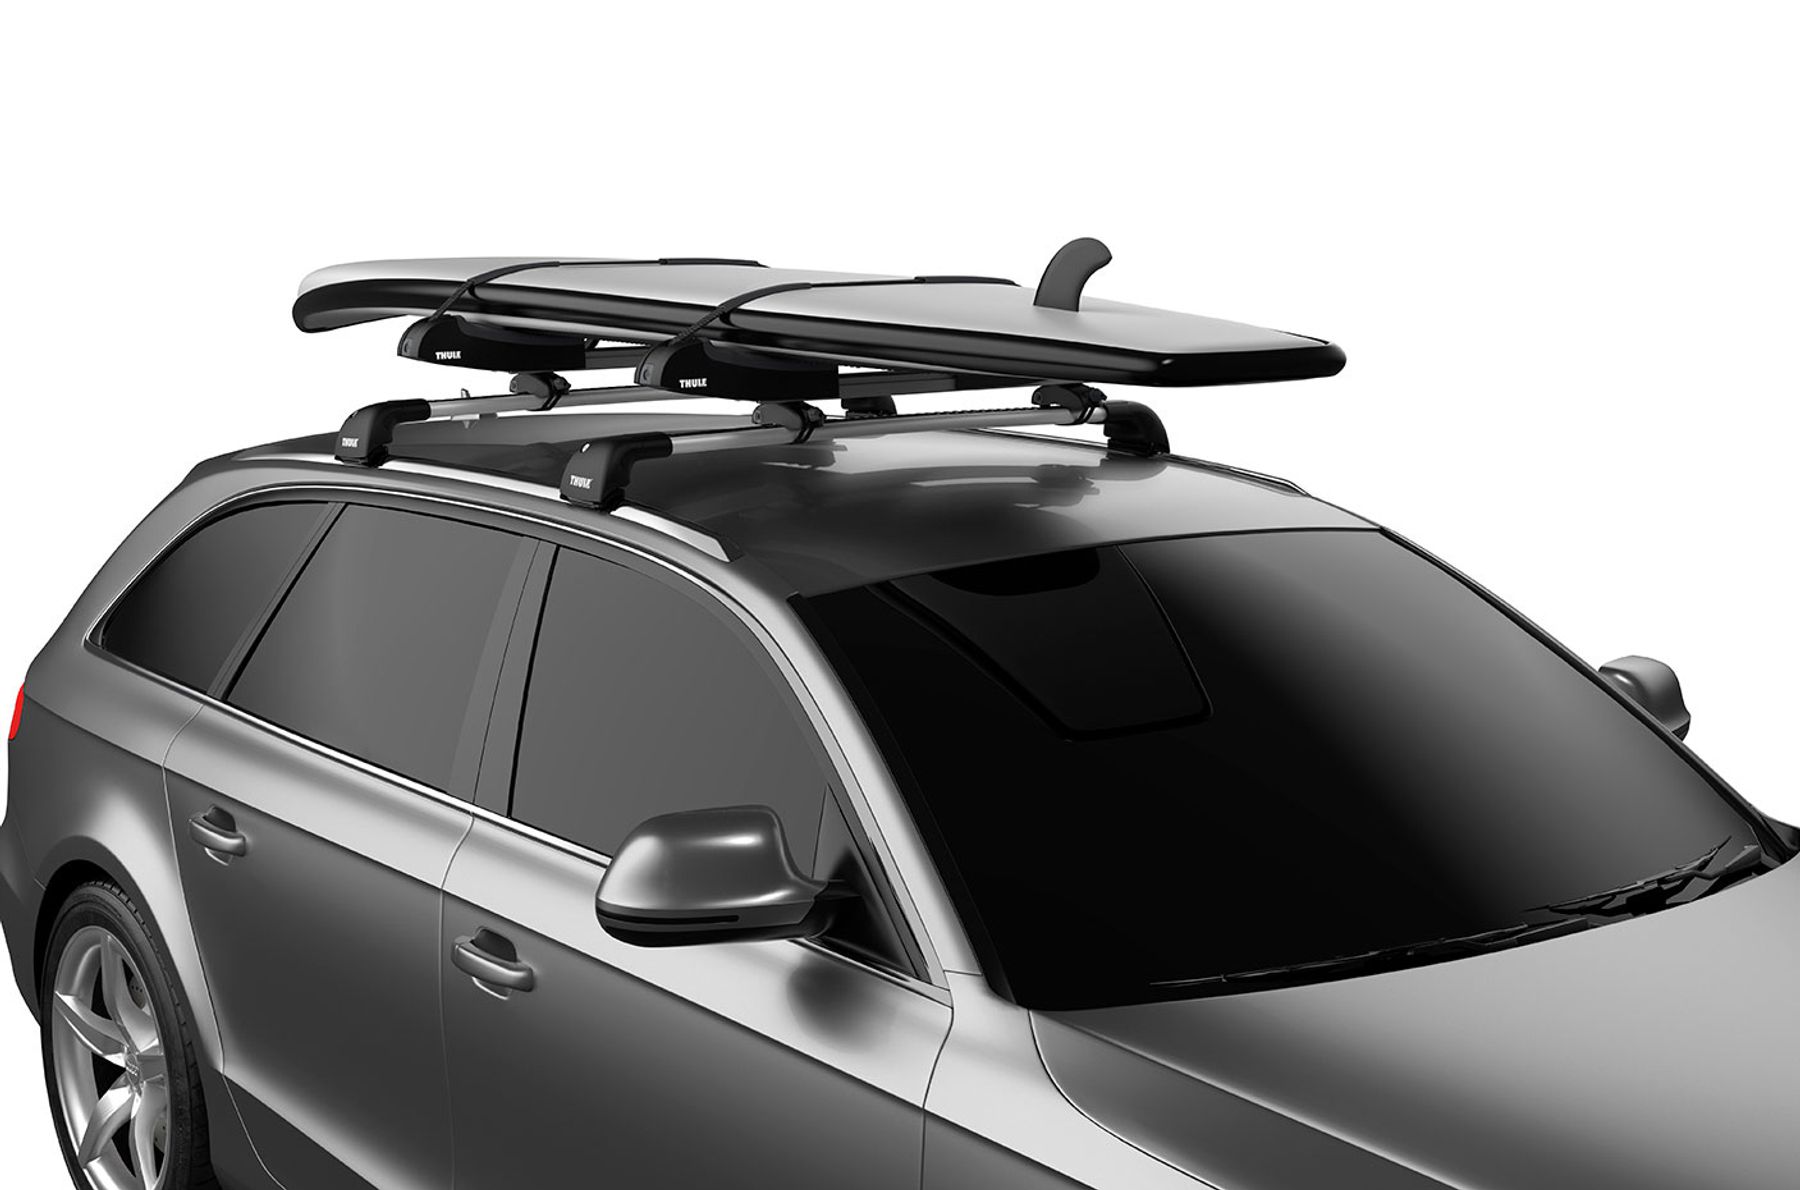 Thule SUP Taxi | Thule Nederland